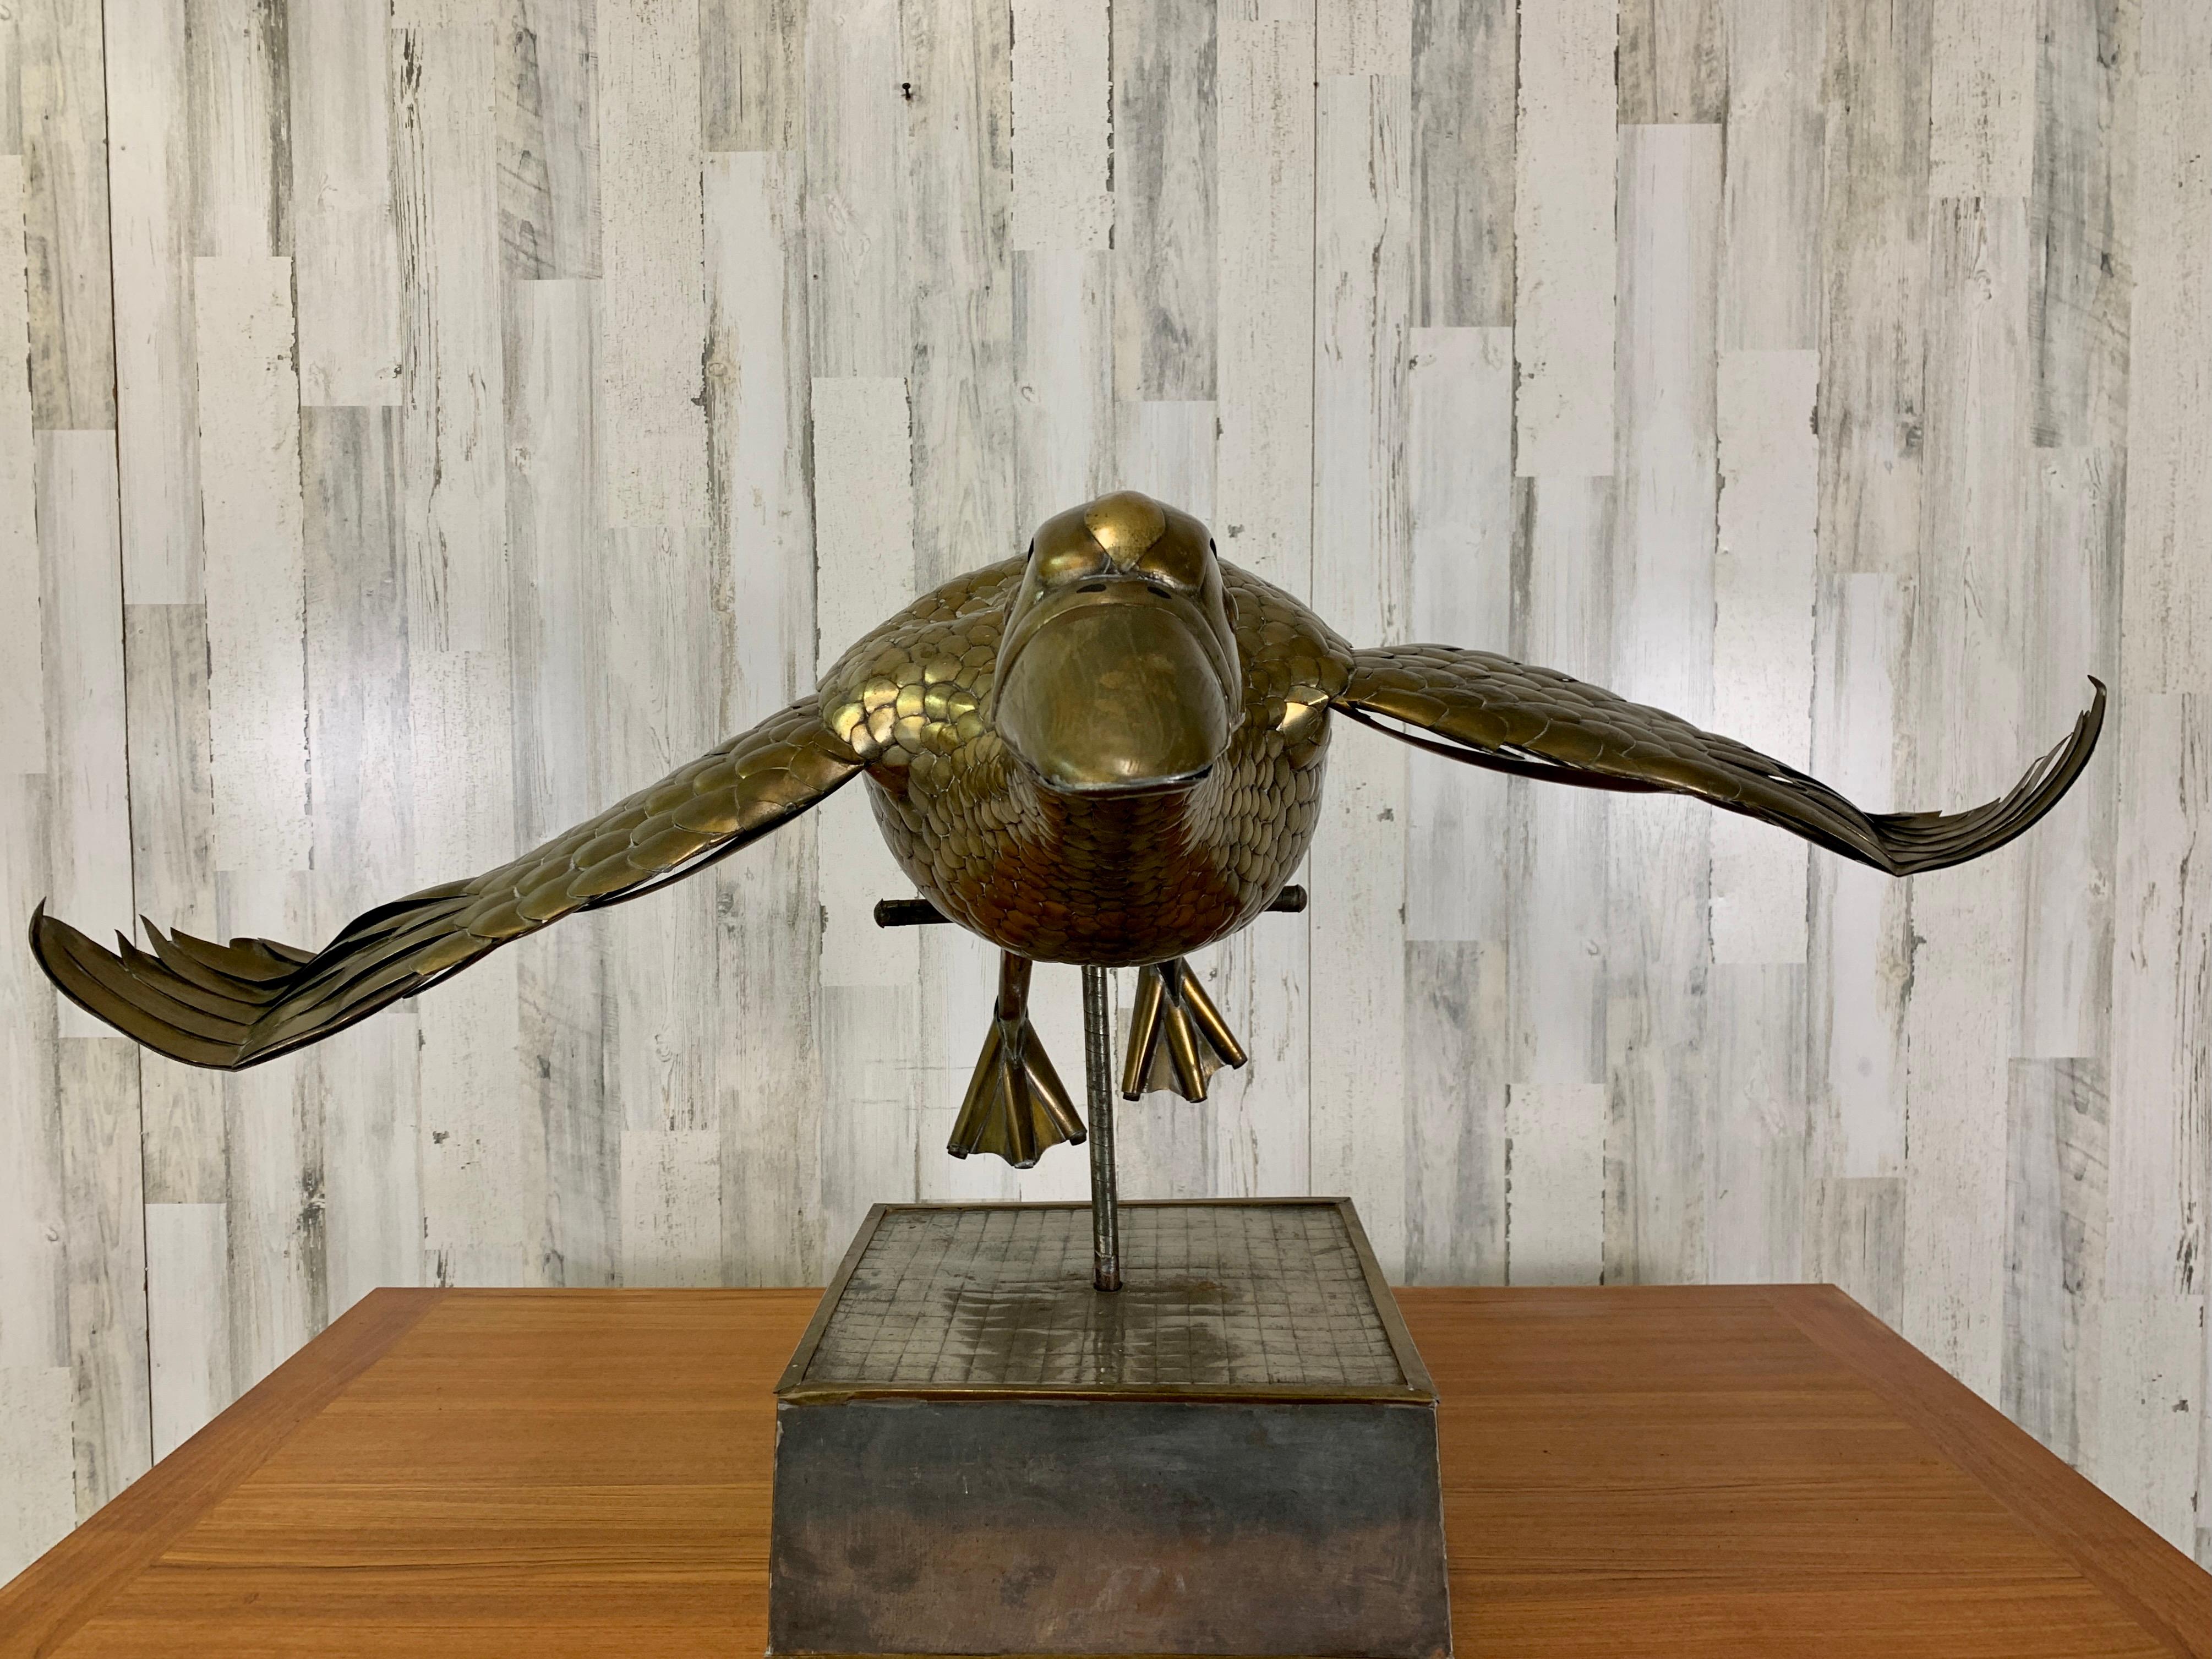 Limited Edition 2/100 Sergio Bustamante Flying Duck Sculpture 9